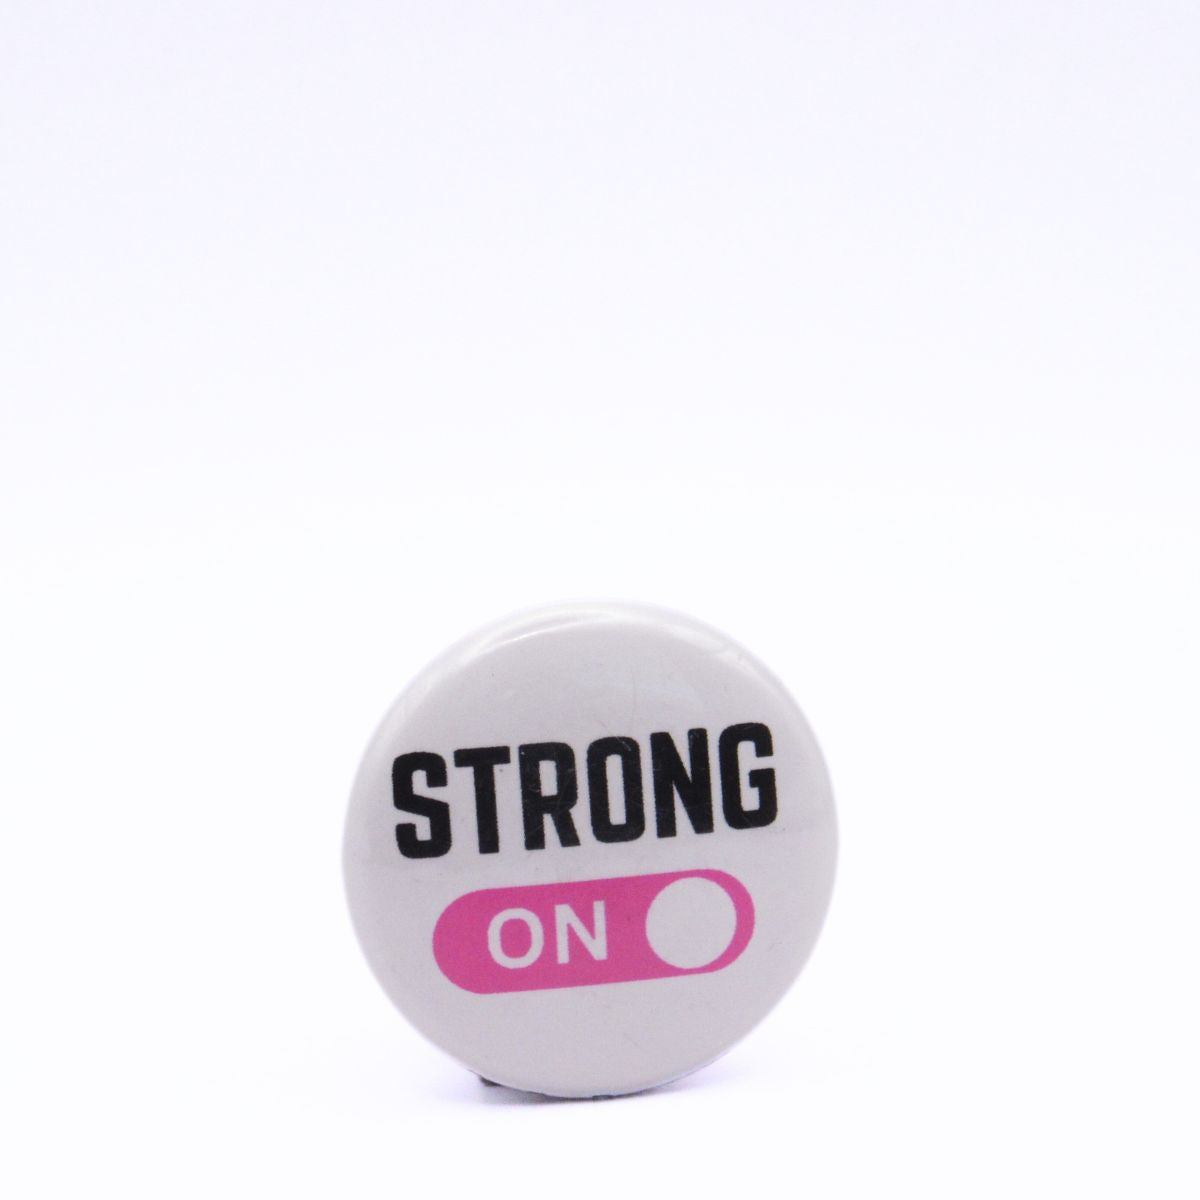 BooBooRoo Pinback Button (i.e. button, badge, pin) displaying strong mode is on. Pink background for mode indicator.